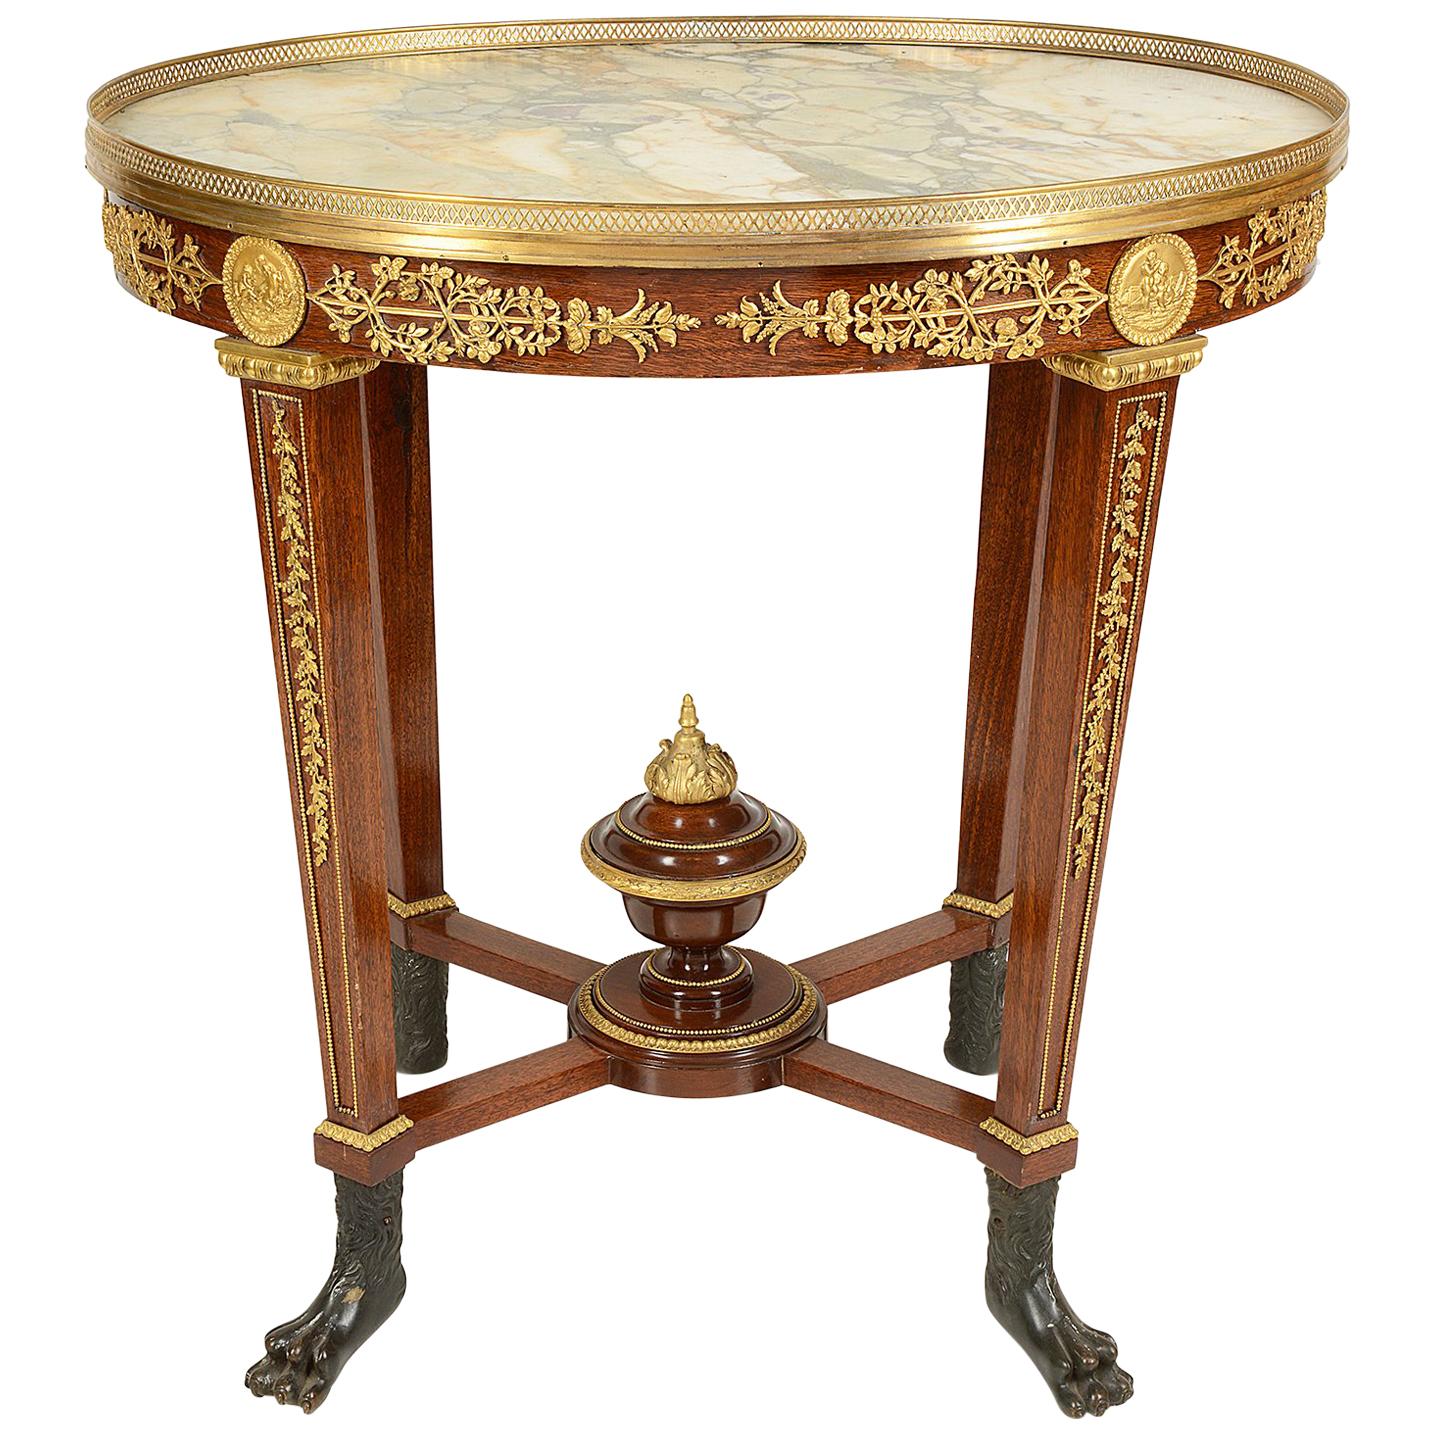 Empire Influenced Centre Table, 19th Century